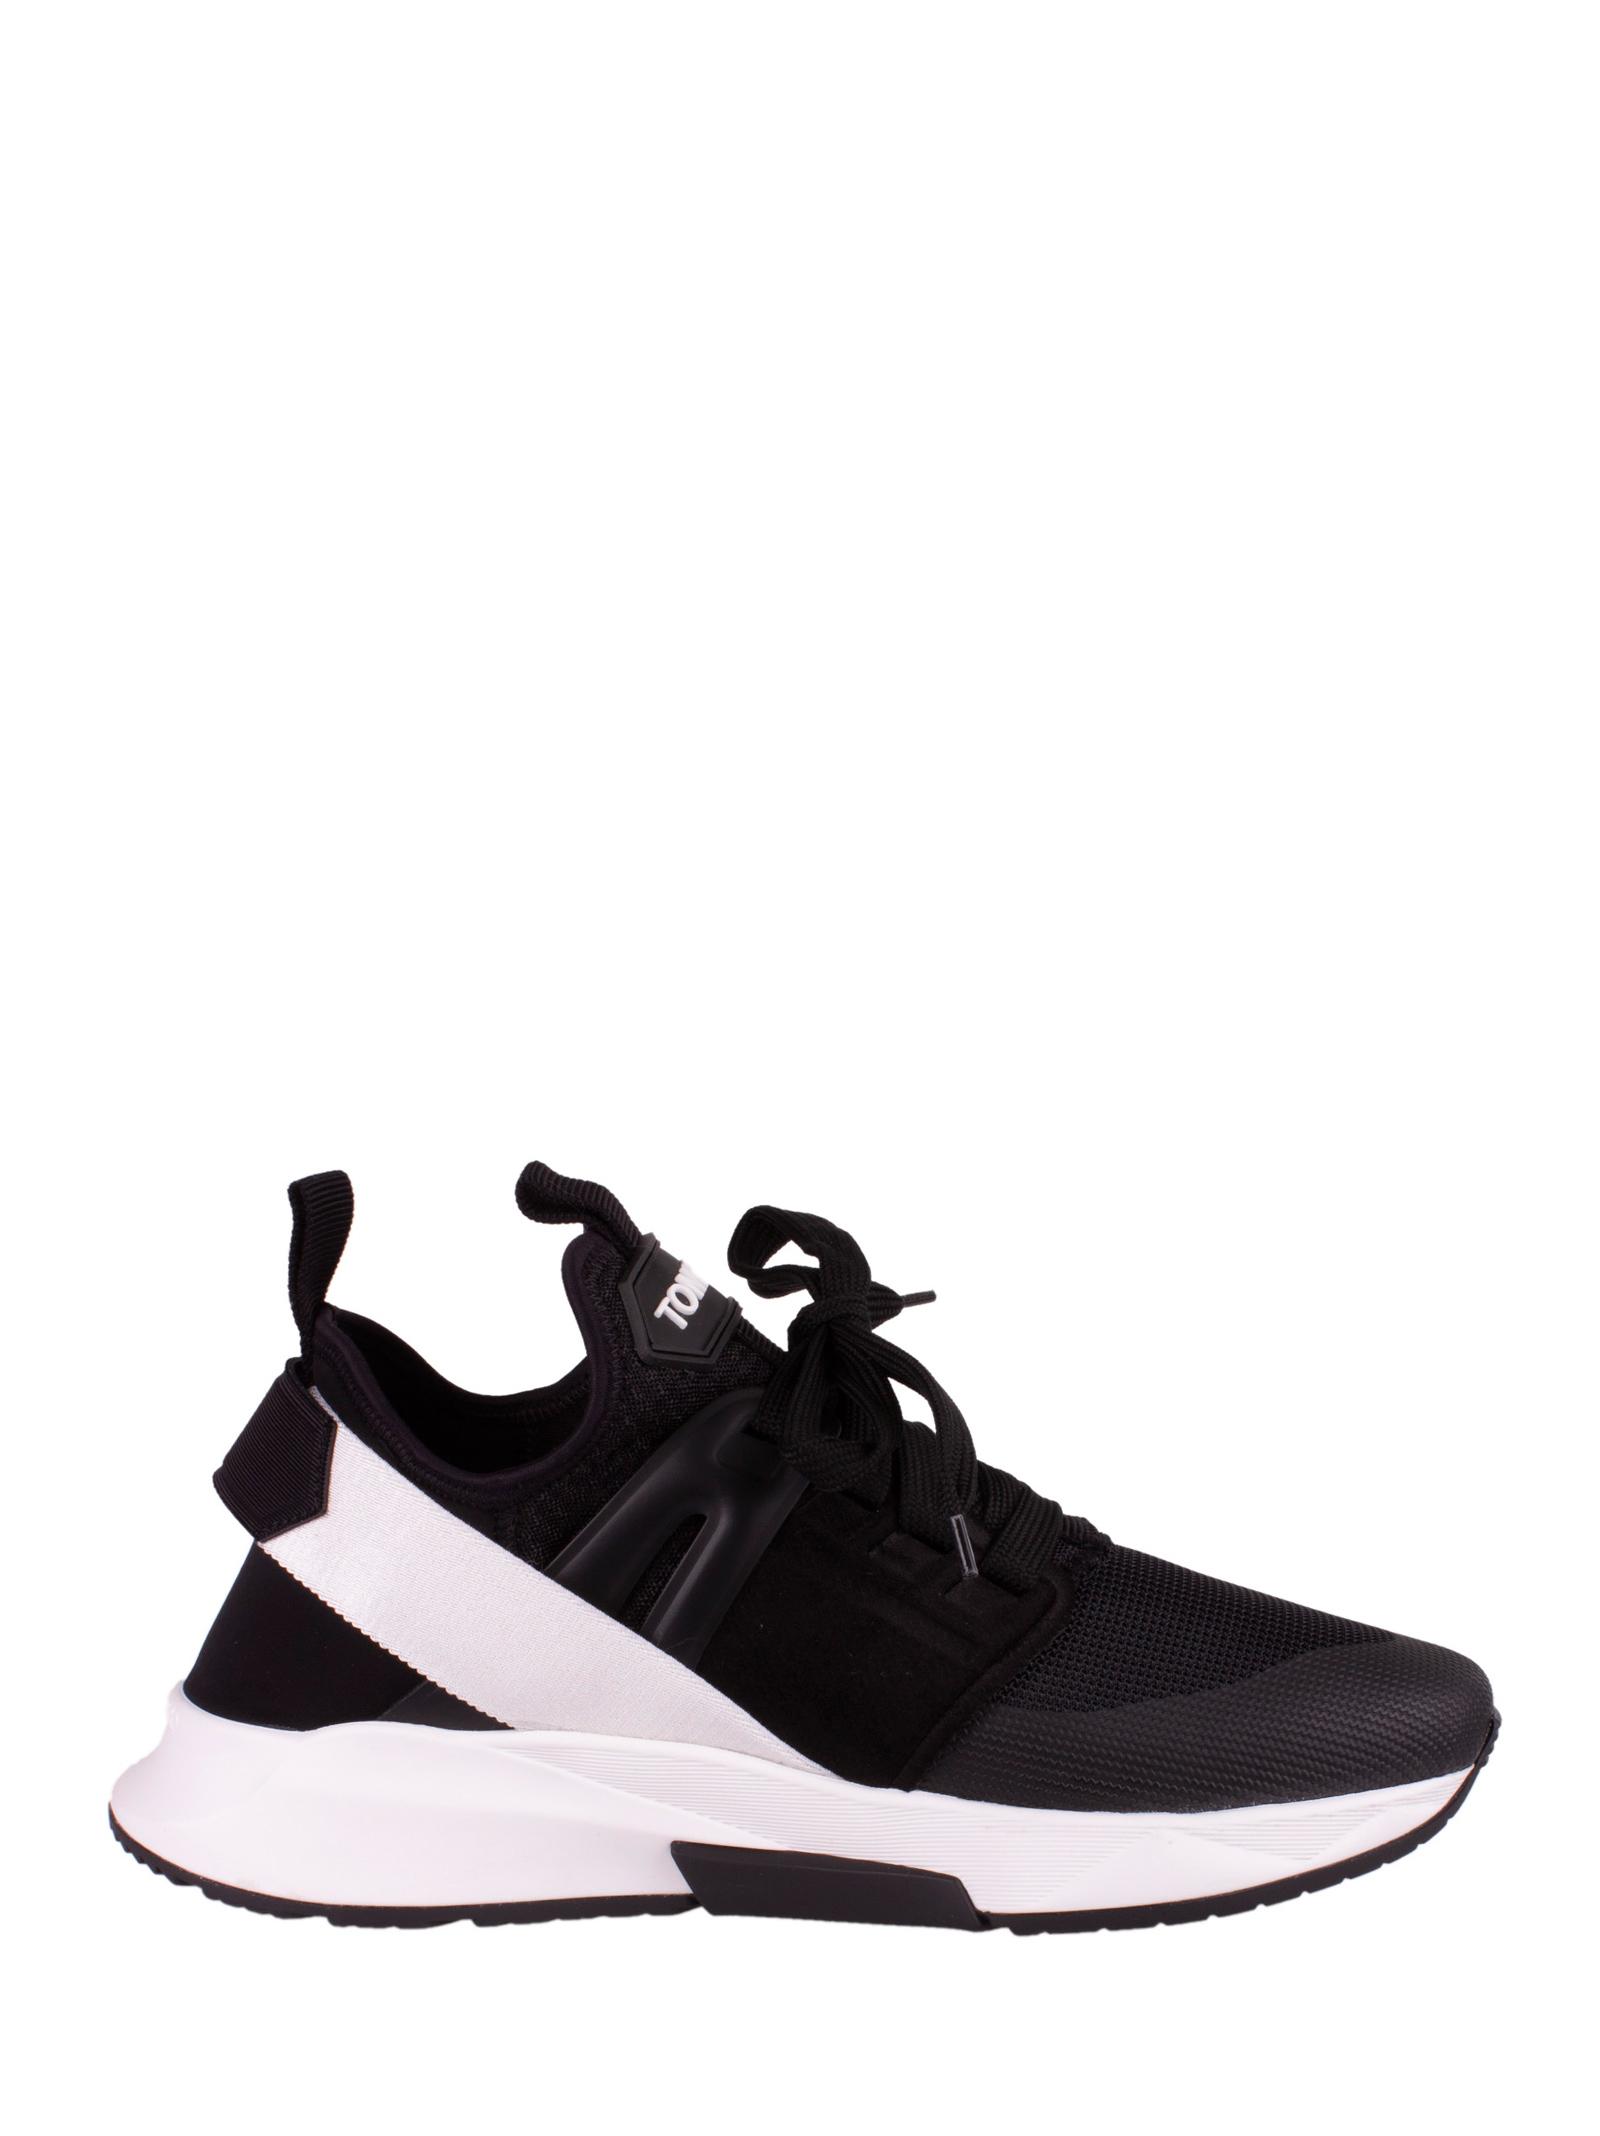 tom ford jago sneakers